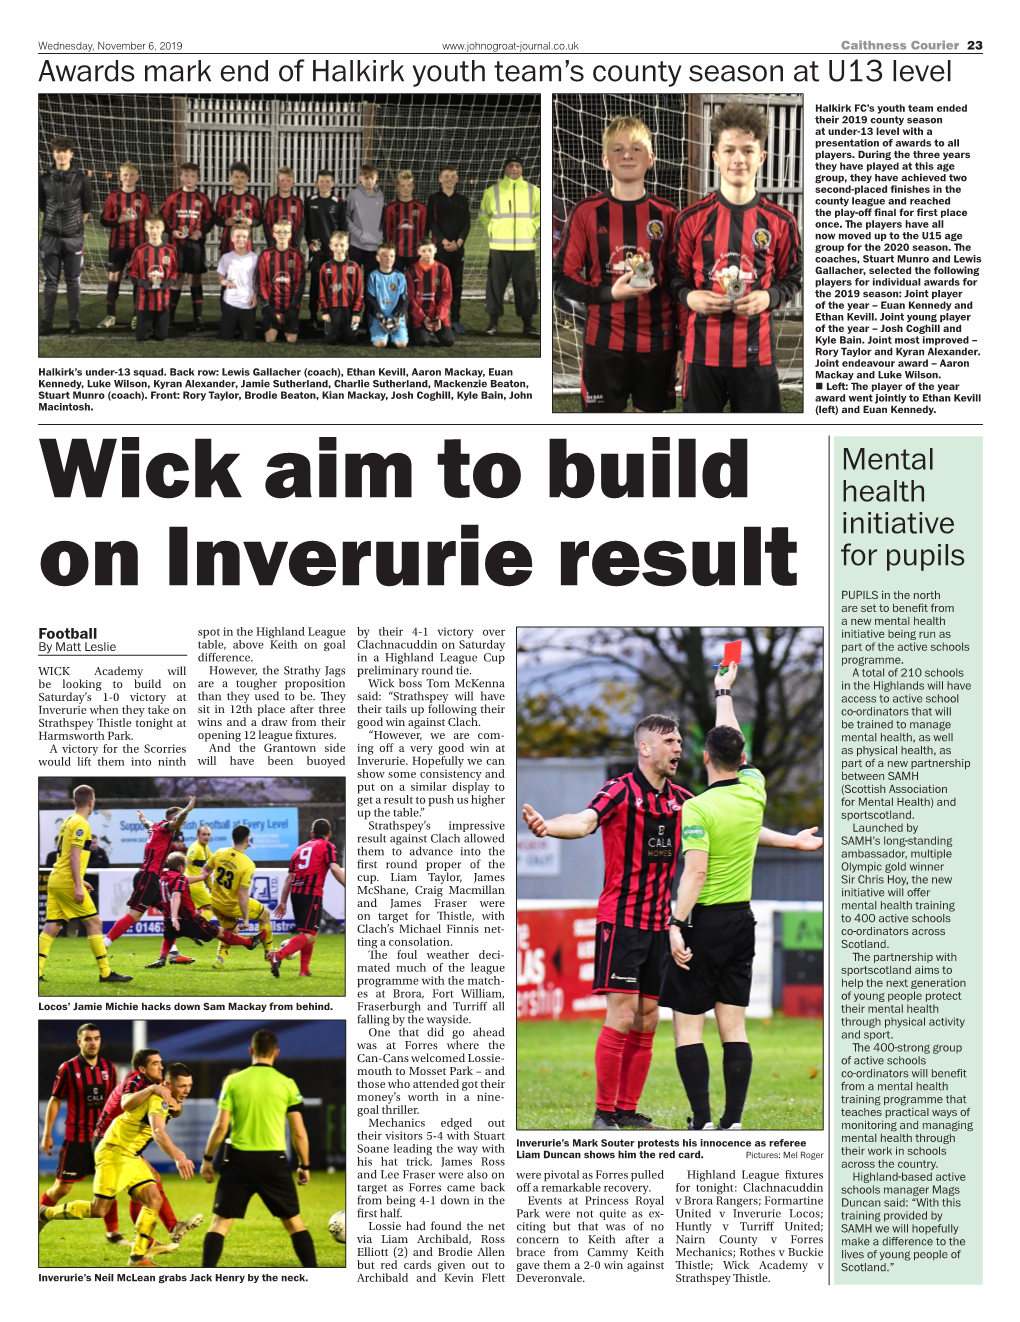 Wick Aim to Build on Inverurie Result